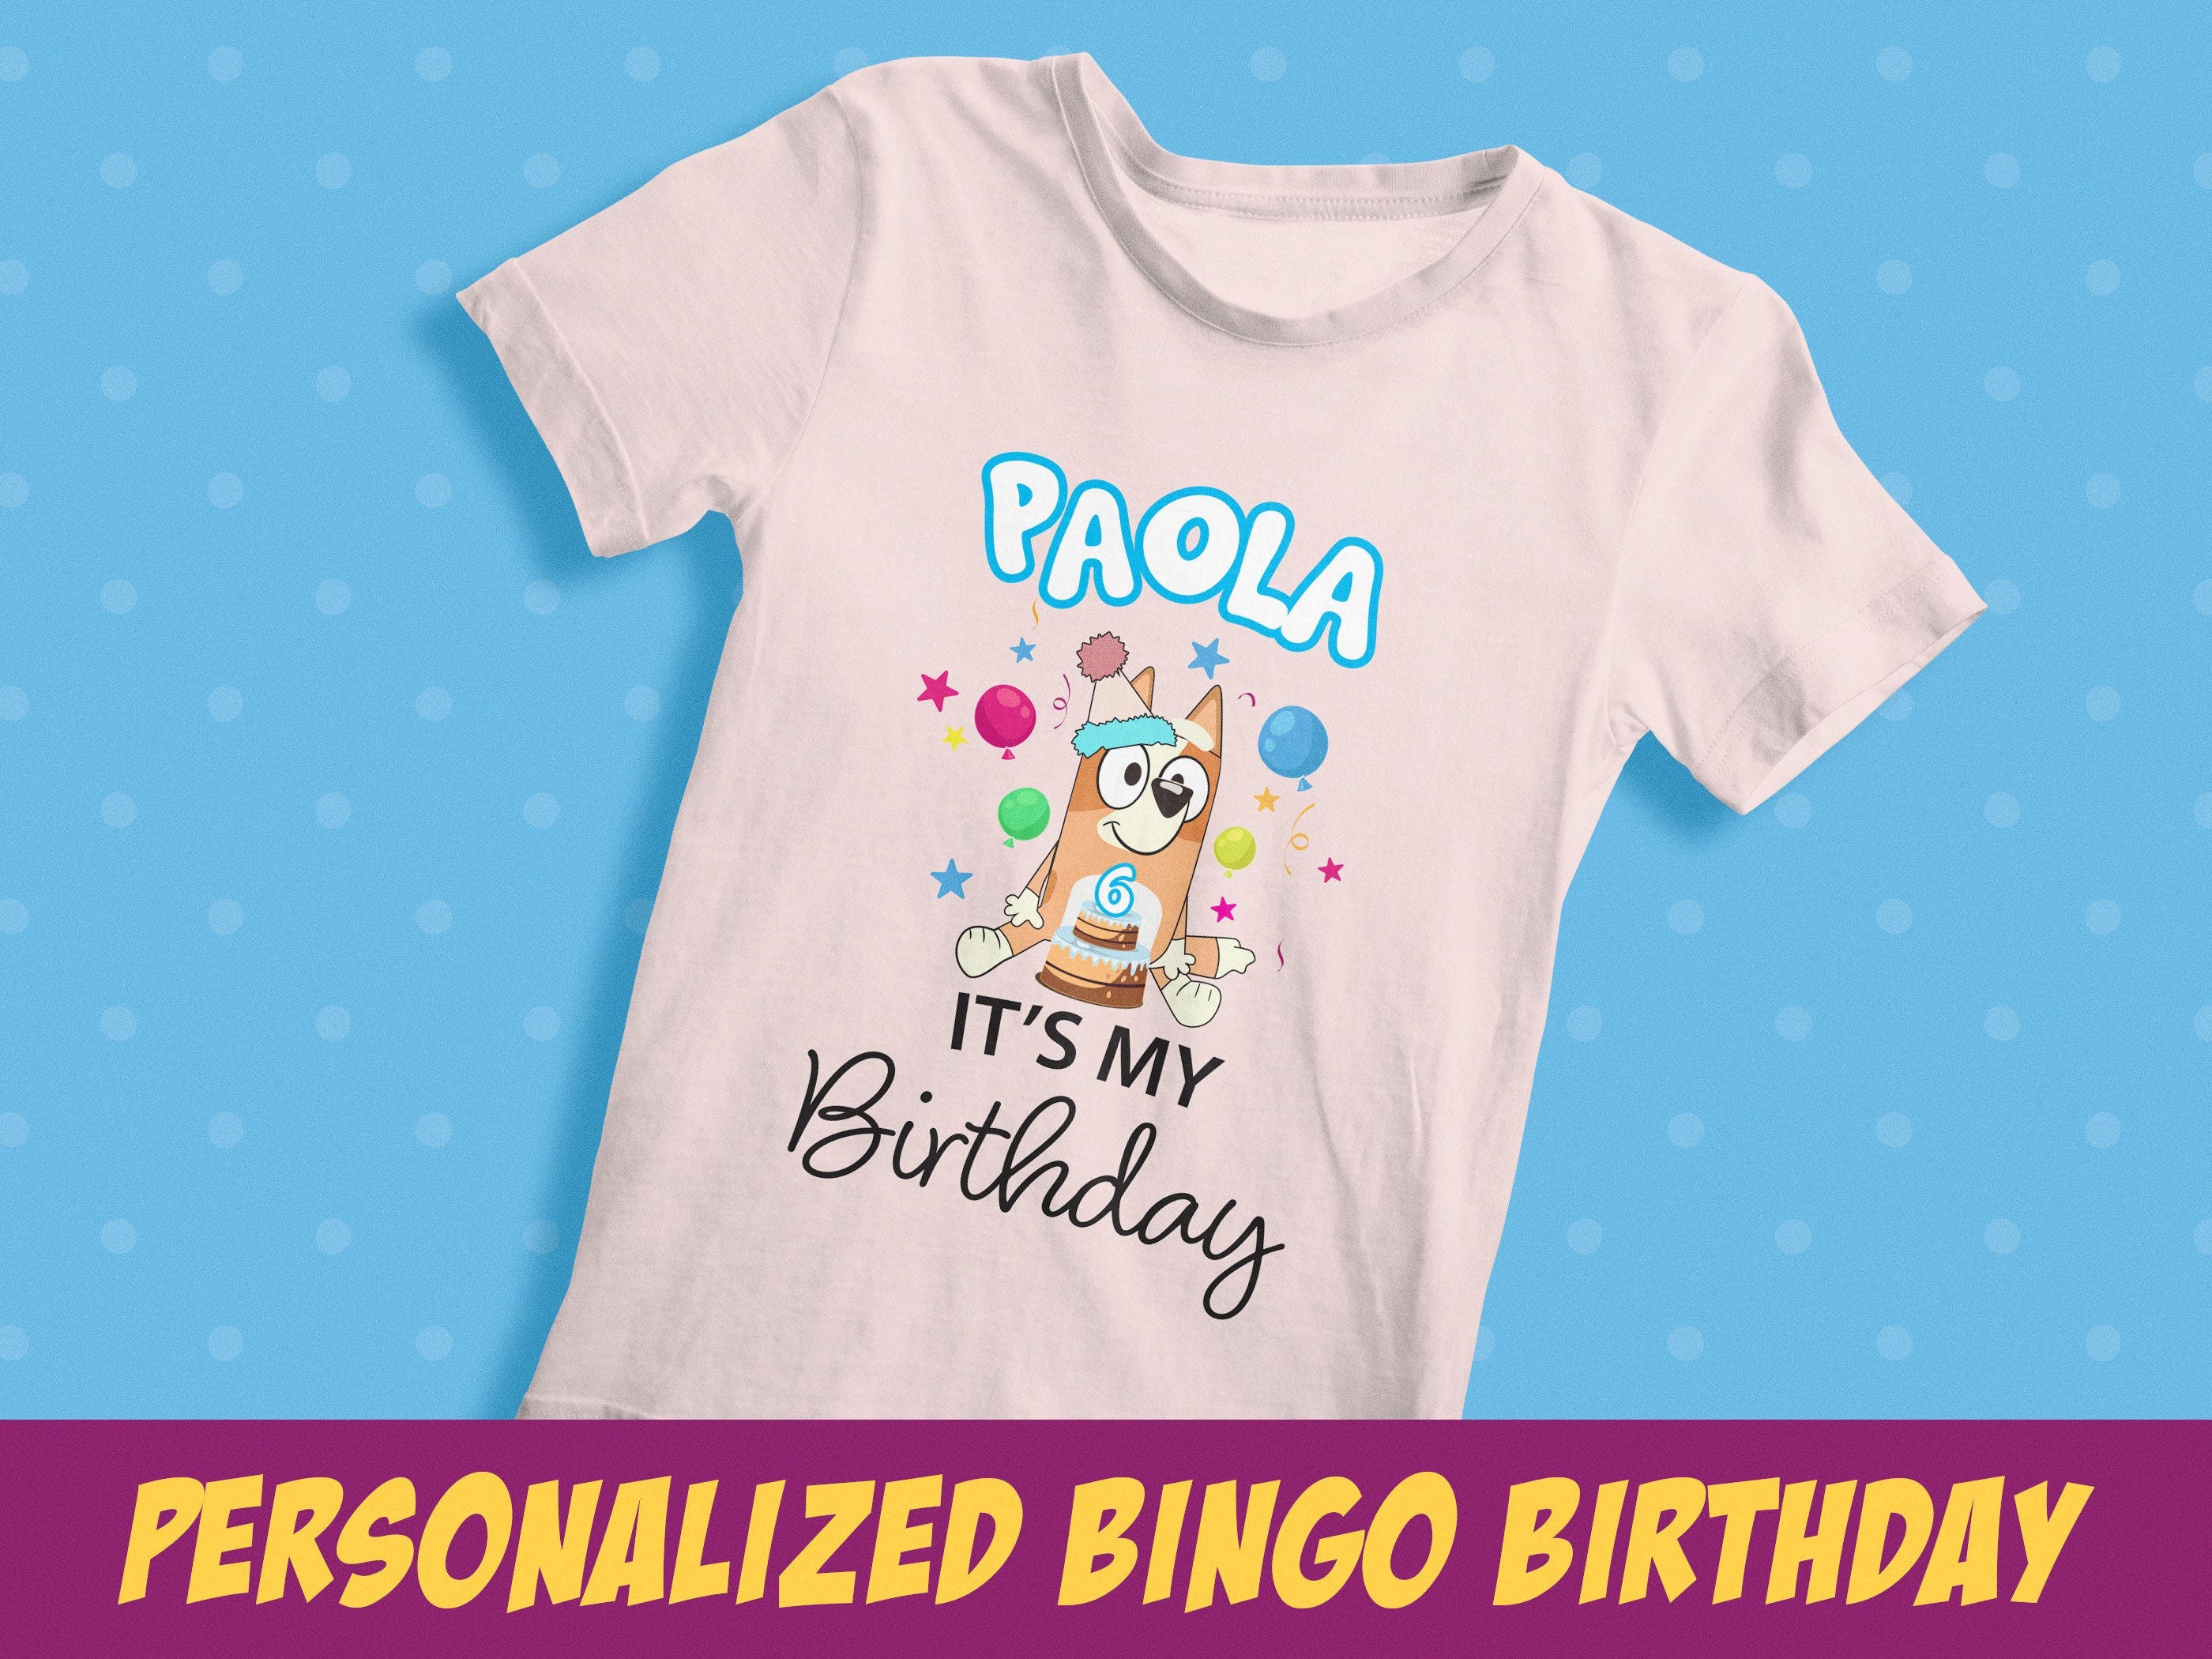 Bluey Bingo Personalized birthday design, Cricut/Silhouette Compatible, Party Supplies, Instant Download Printable